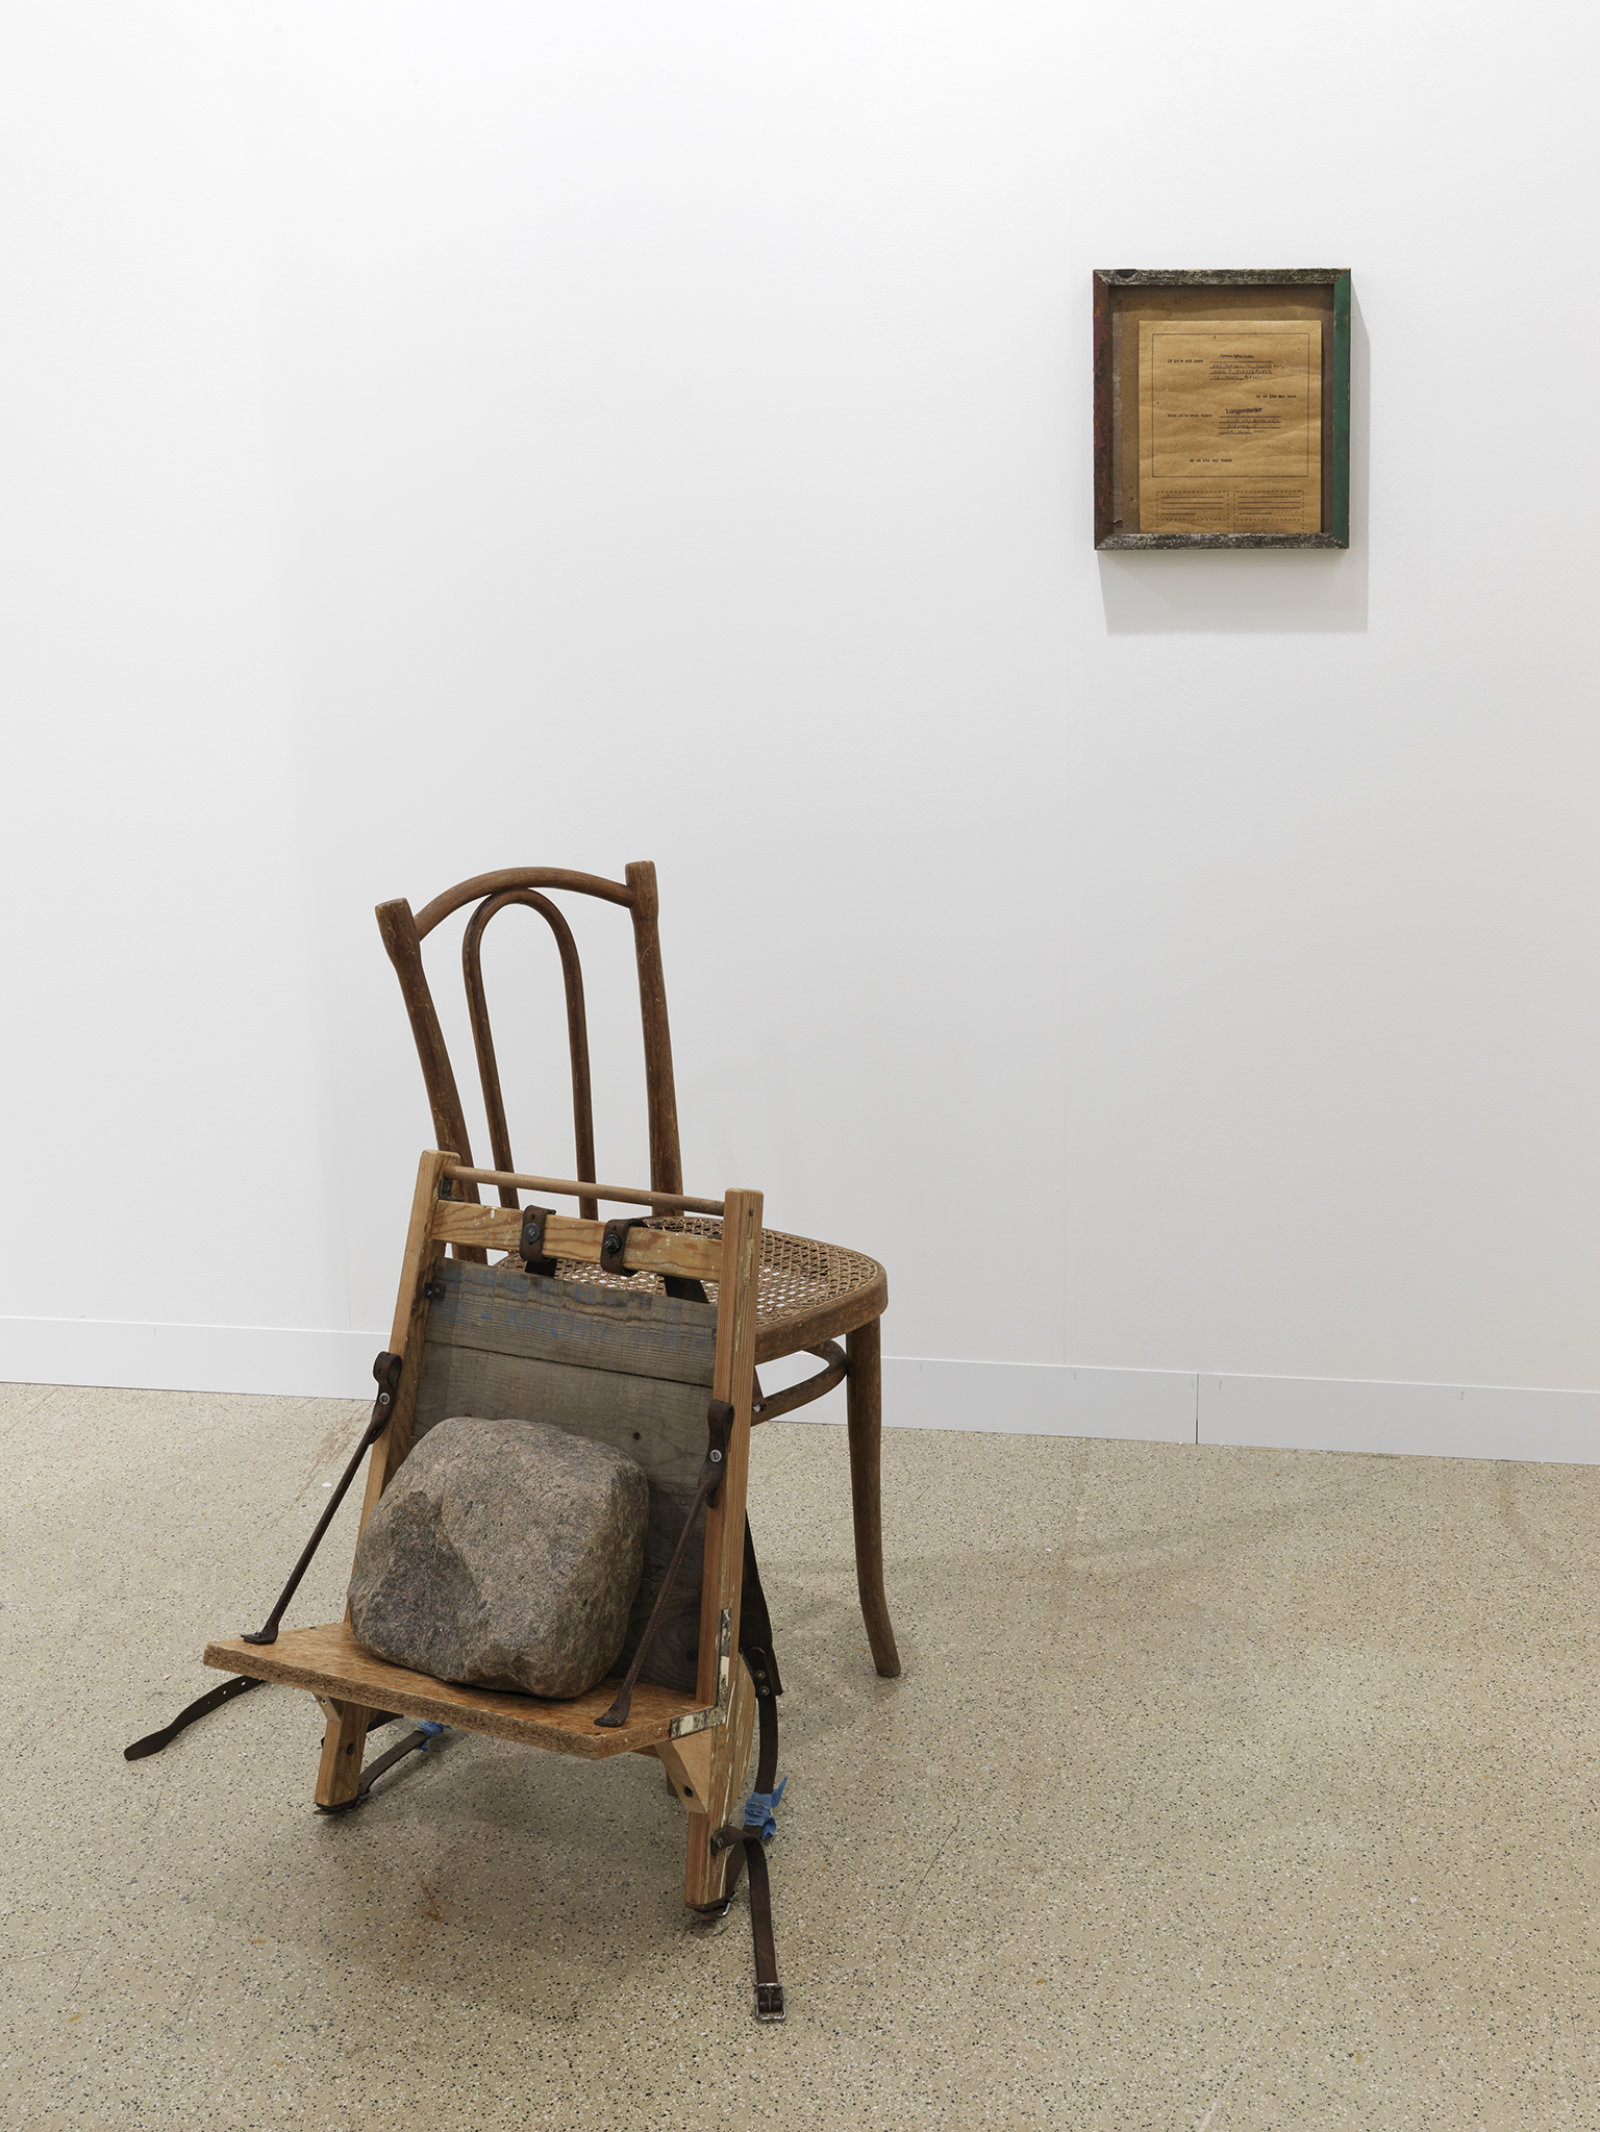 Ashes Withyman, If it’s not here, it’s over there, on its way there or on its way back here, 2010, leather, wood, rock, ink, paper, bolts, screws, chair, dimensions variable